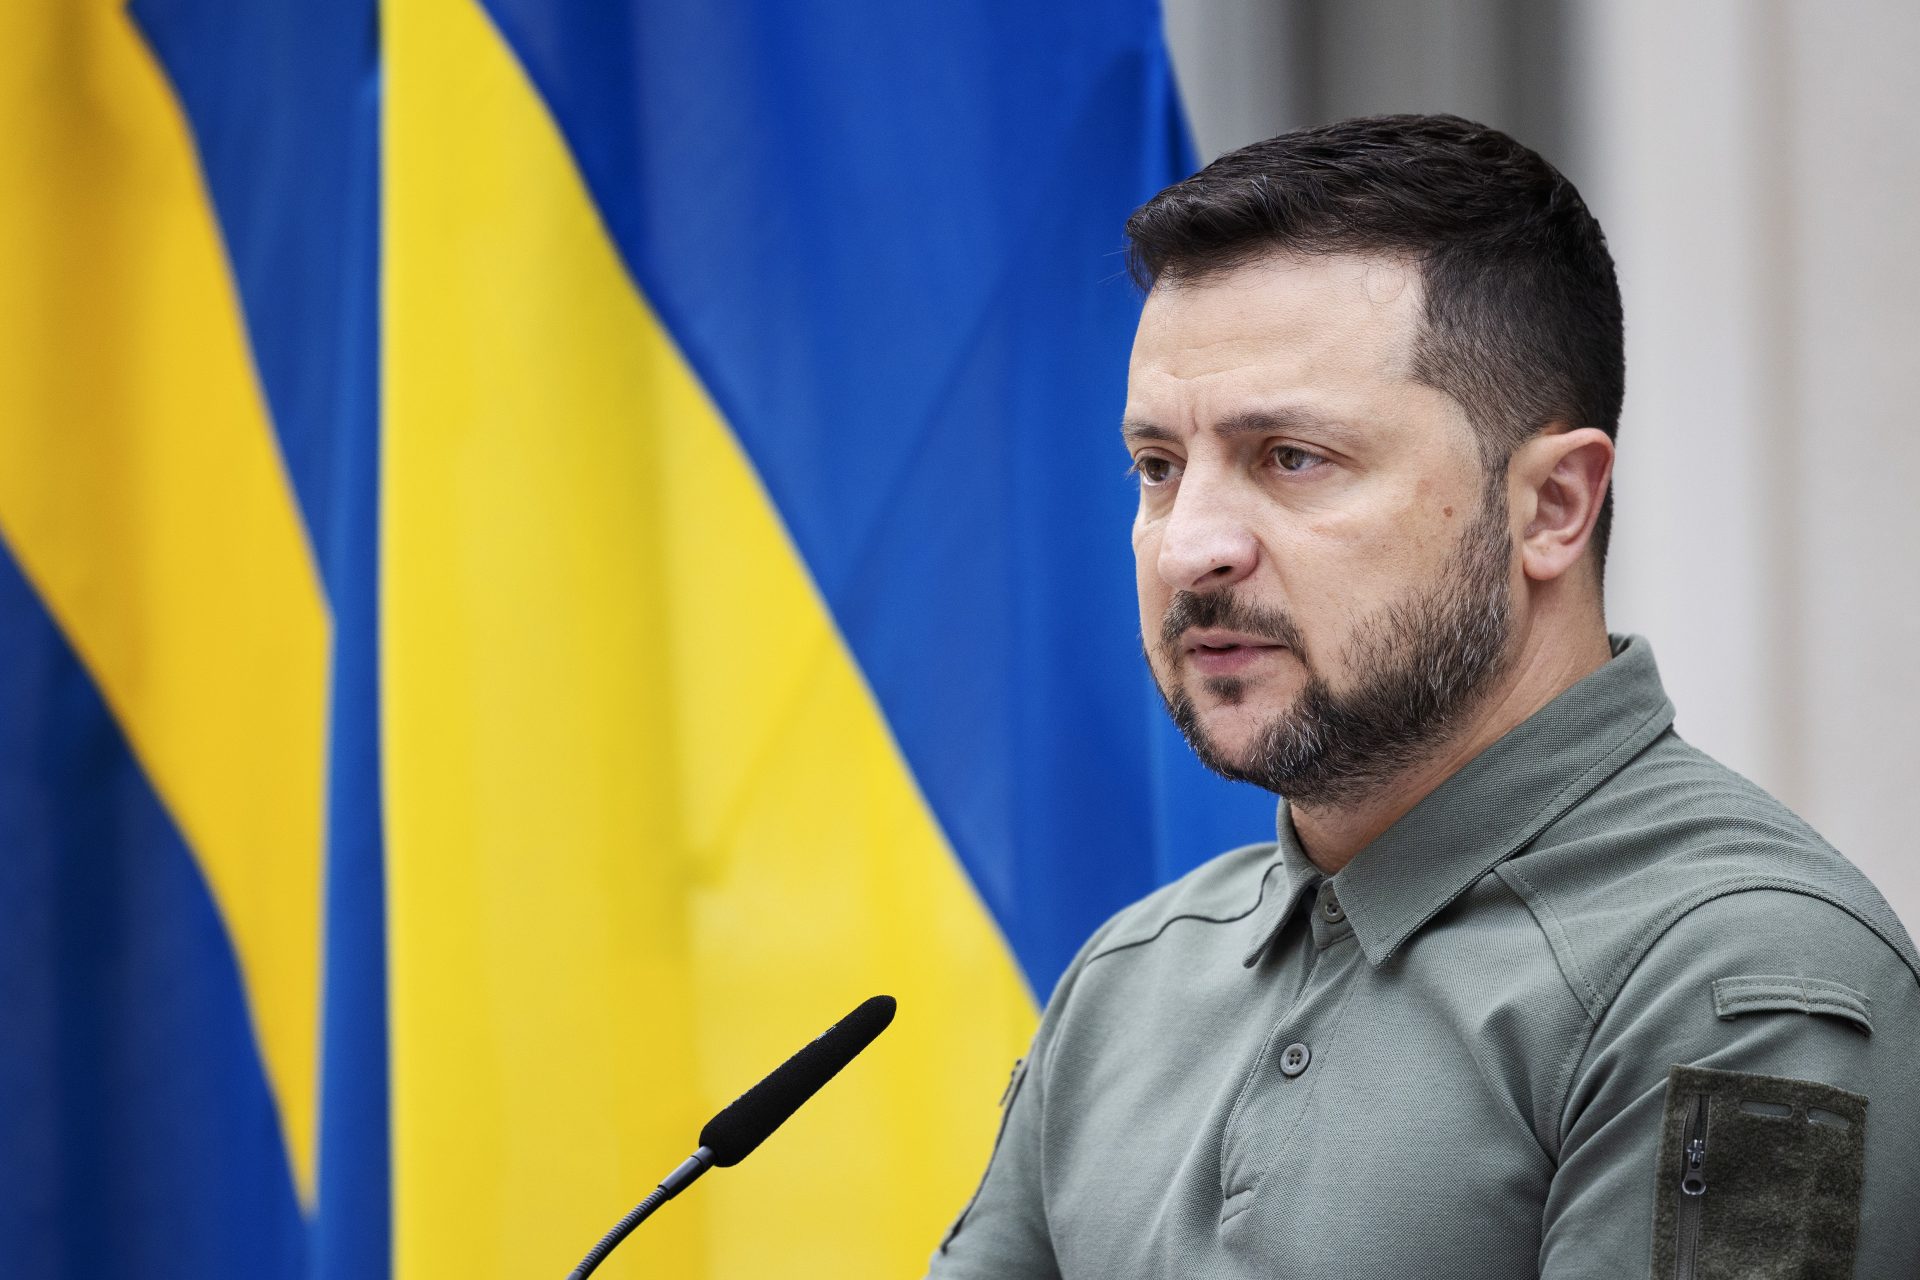 Comments from Zelensky 